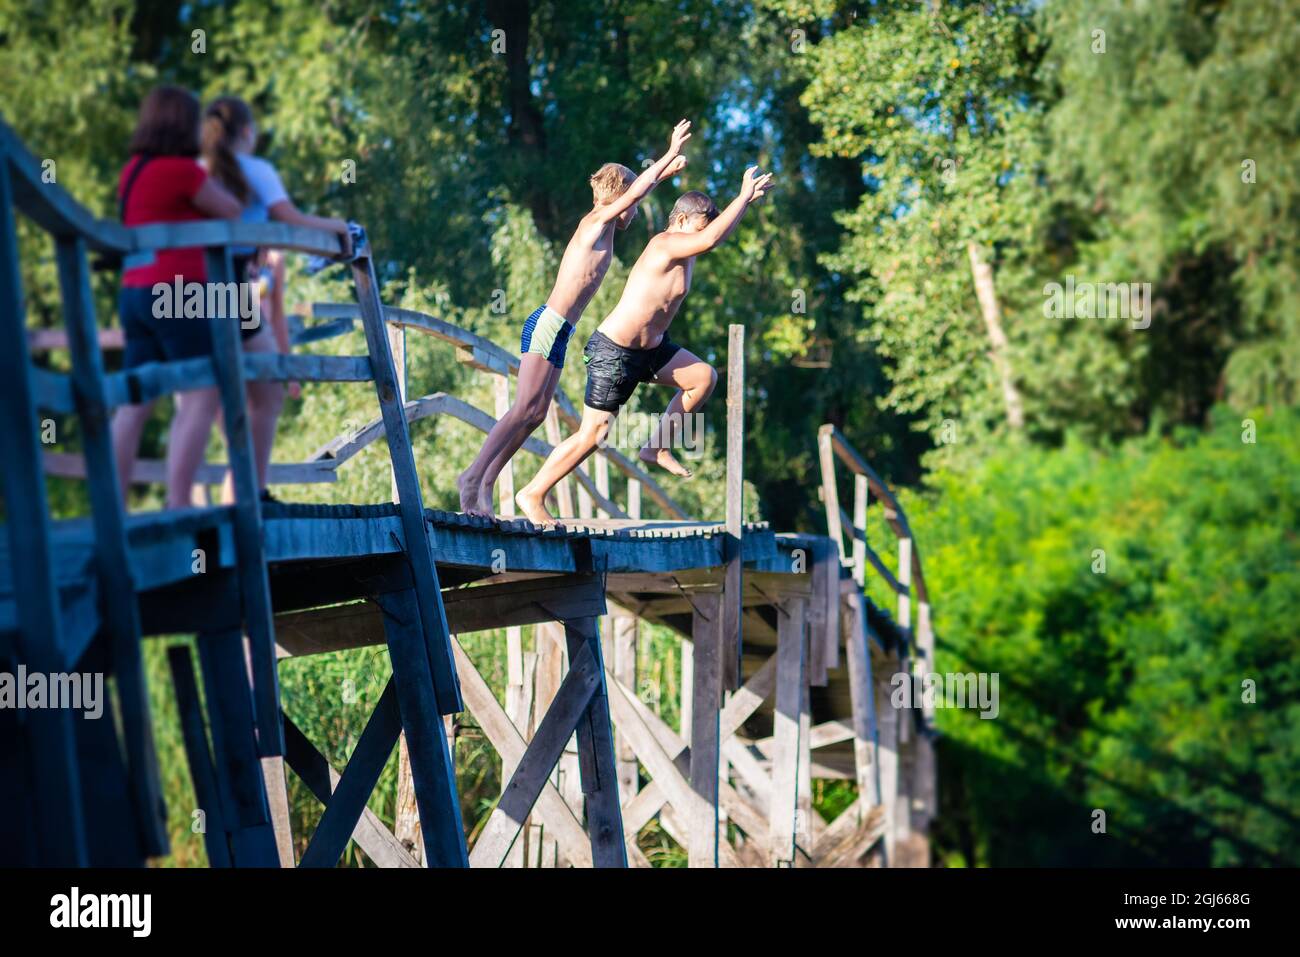 Children jump from a wooden bridge into the river Stock Photo